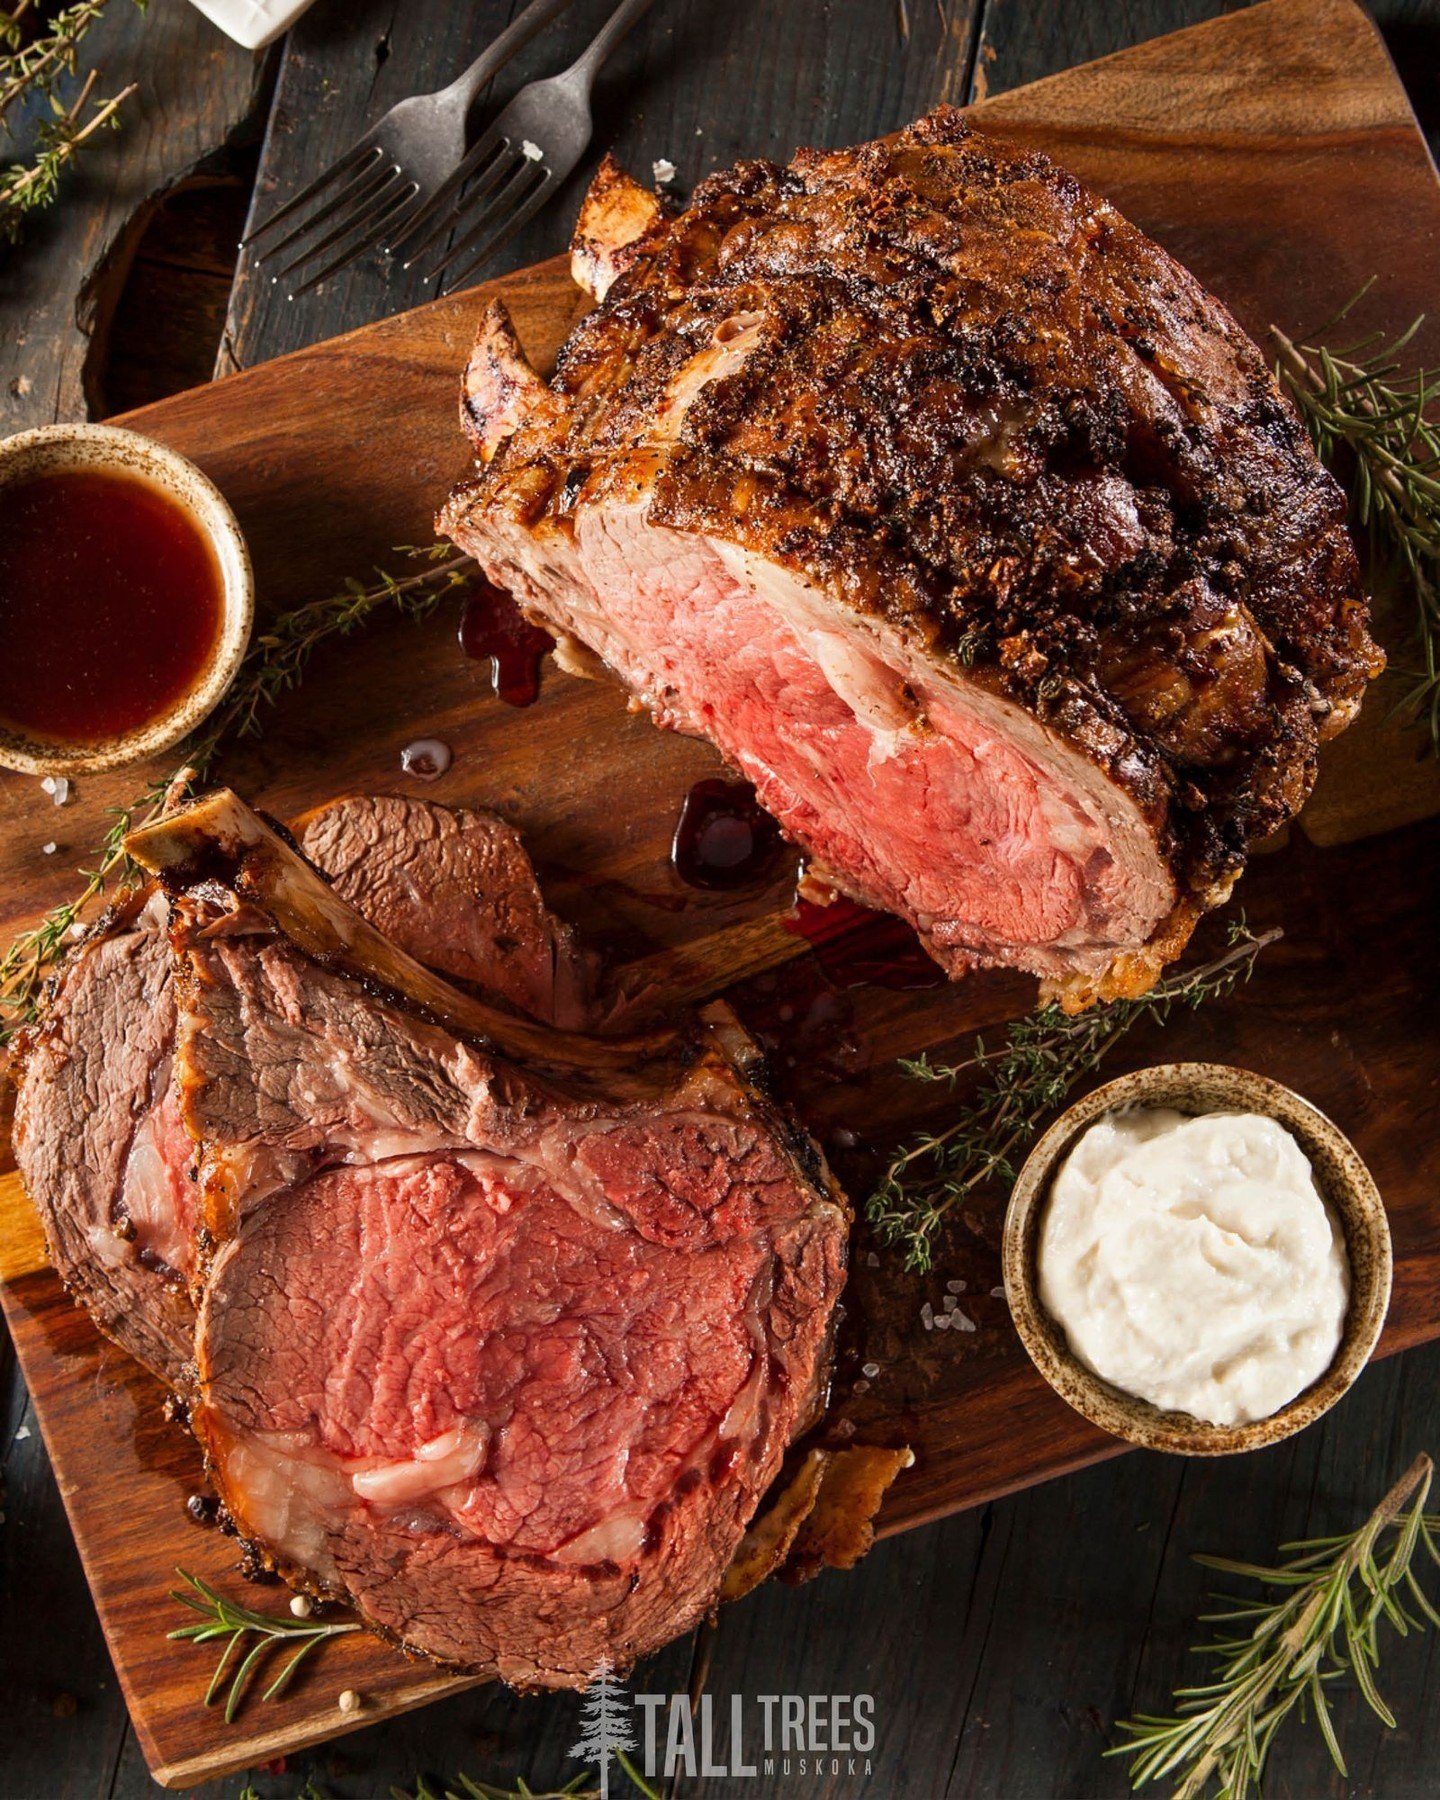 Join us on Saturdays for Tall Trees' classic Prime Rib served with Yorkshire pudding, truffle country mash, seasonal vegetables and a demi-glace.

Prime Rib quantities are limited, so please join us early to secure this local favourite!

Reserve your